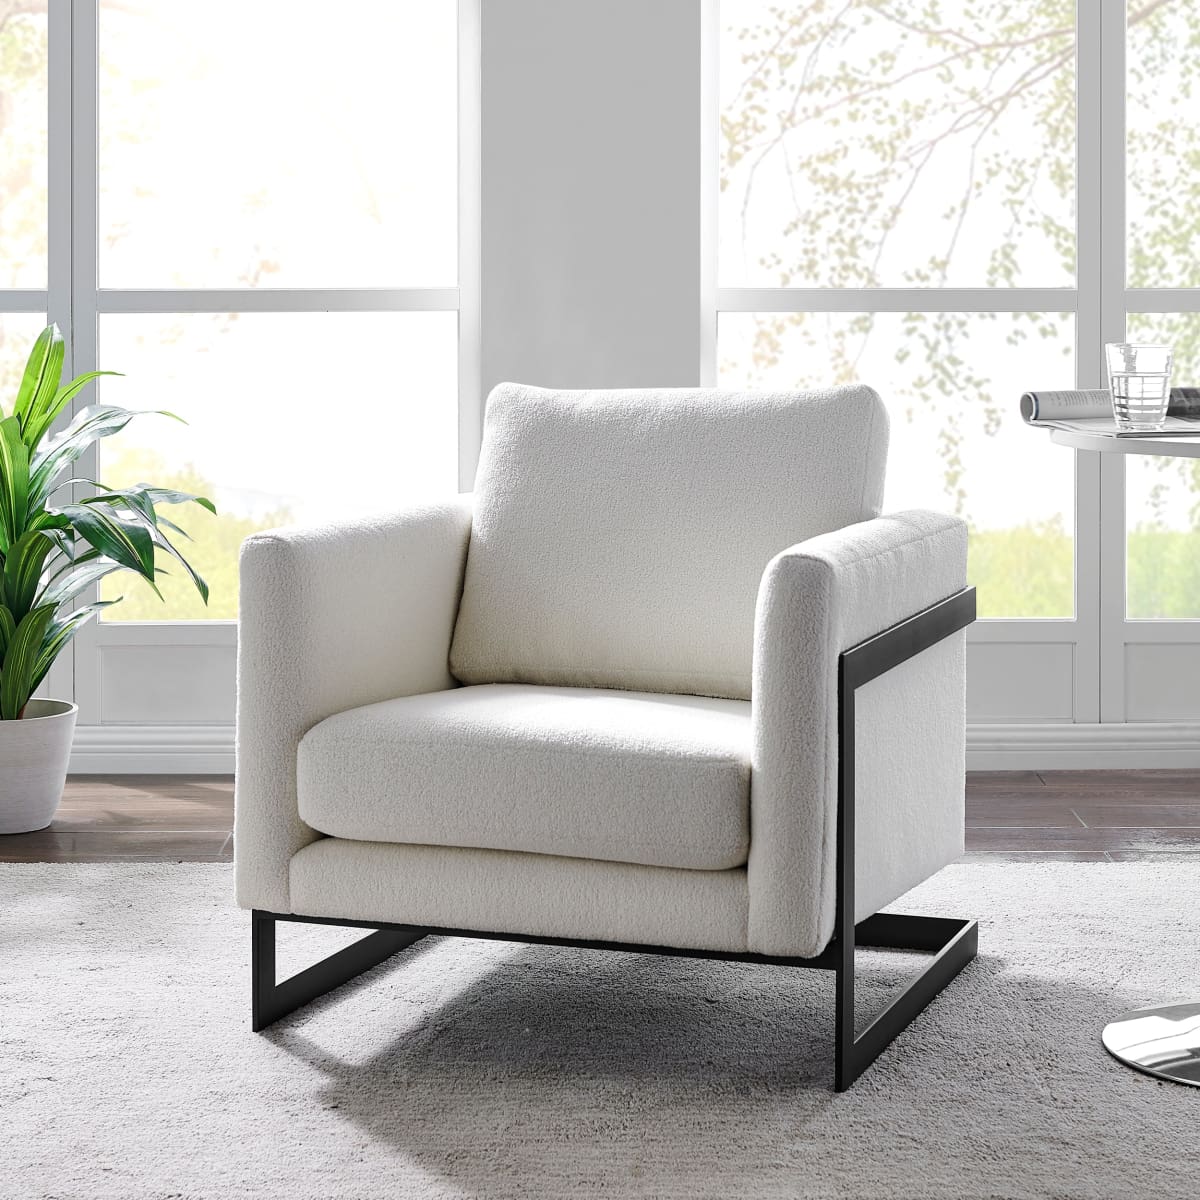 Liam chair - accent chairs